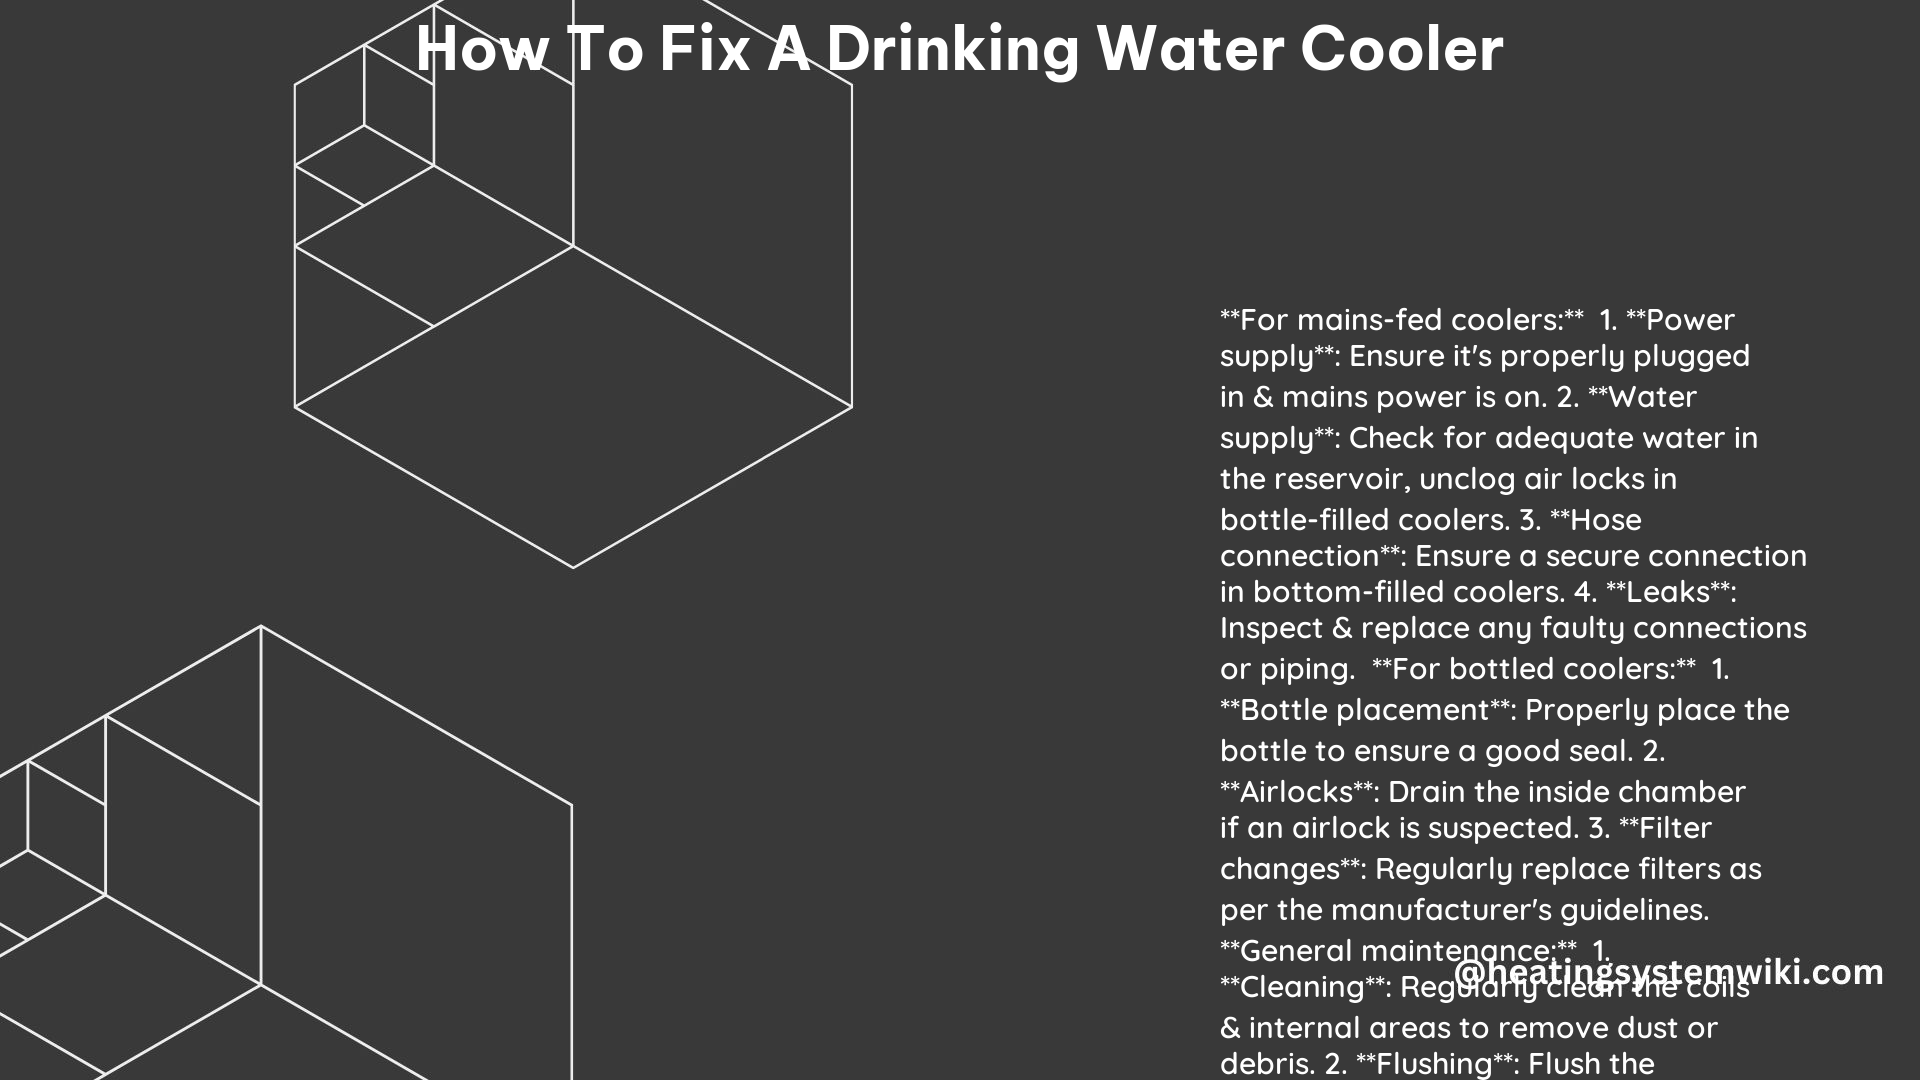 How to Fix a Drinking Water Cooler